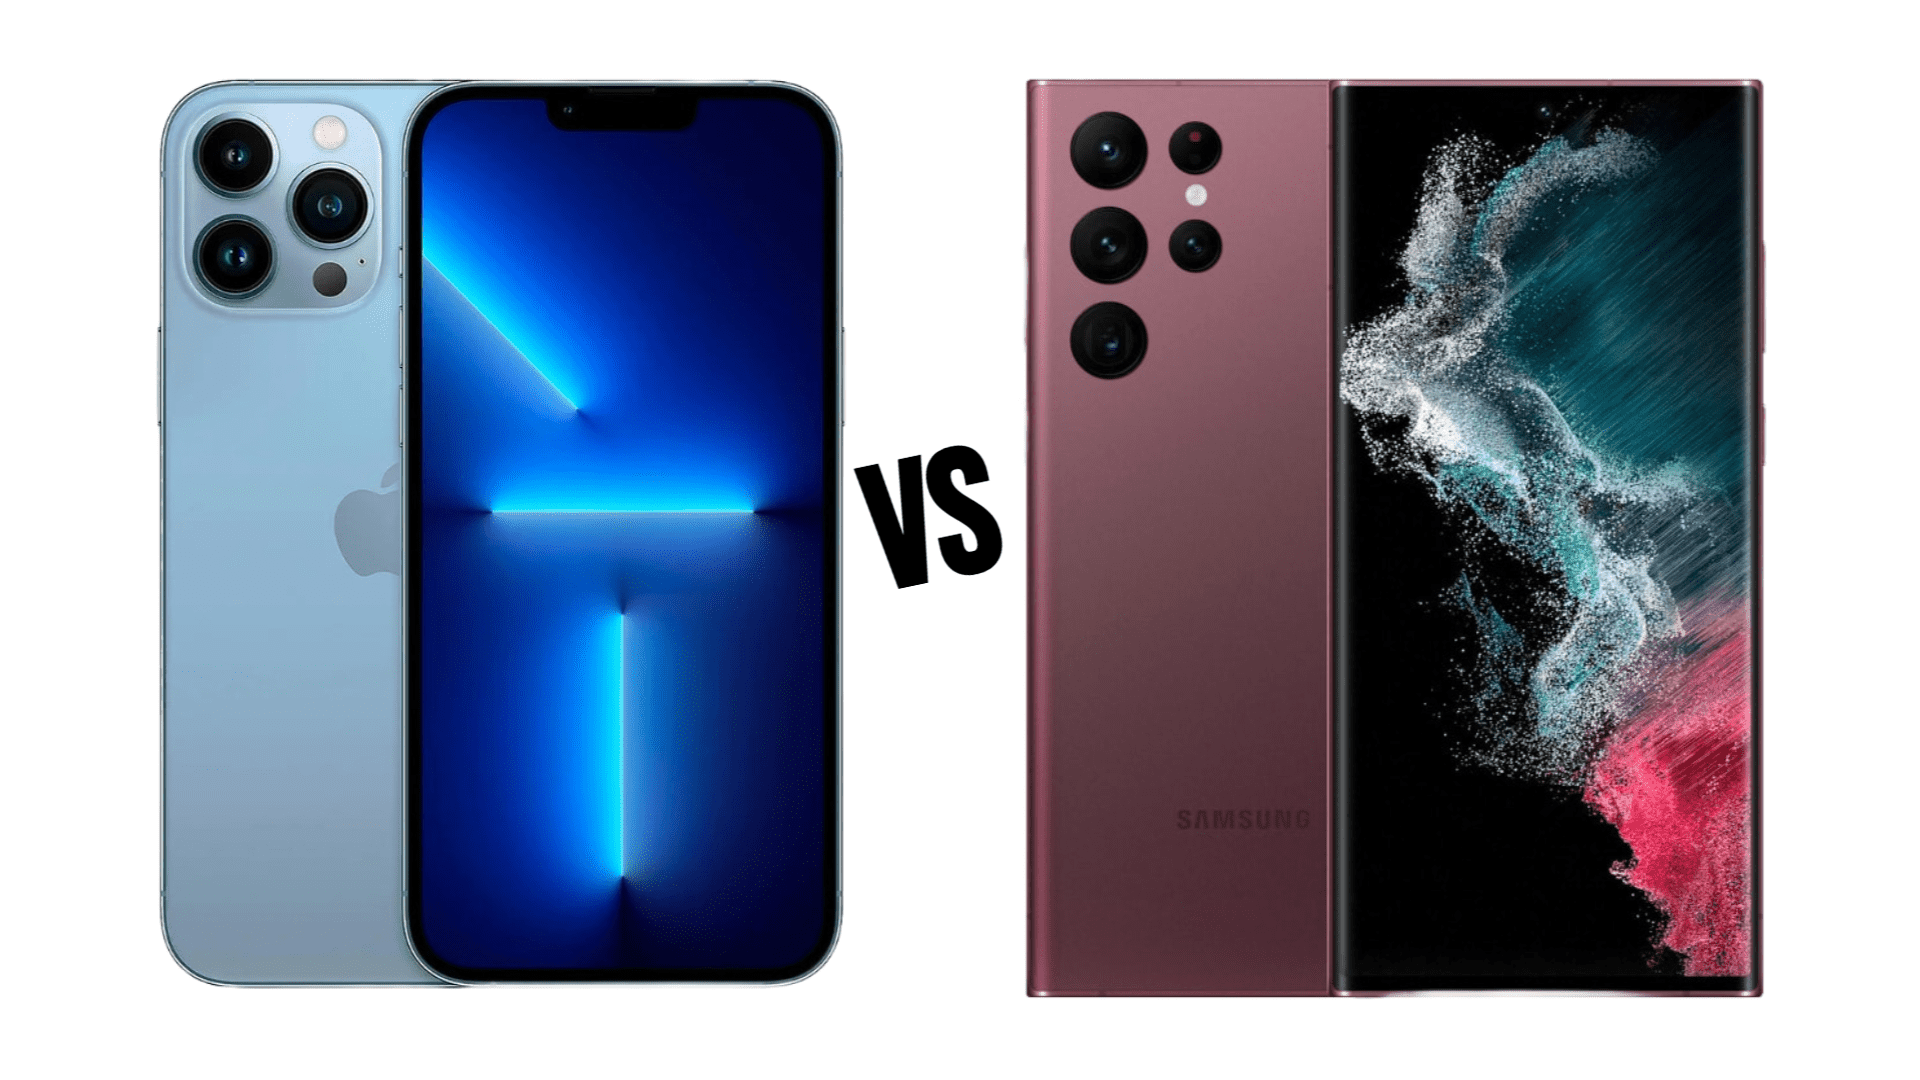 iphone-13-pro-max-vs-samsung-s22-ultra-pros-cons